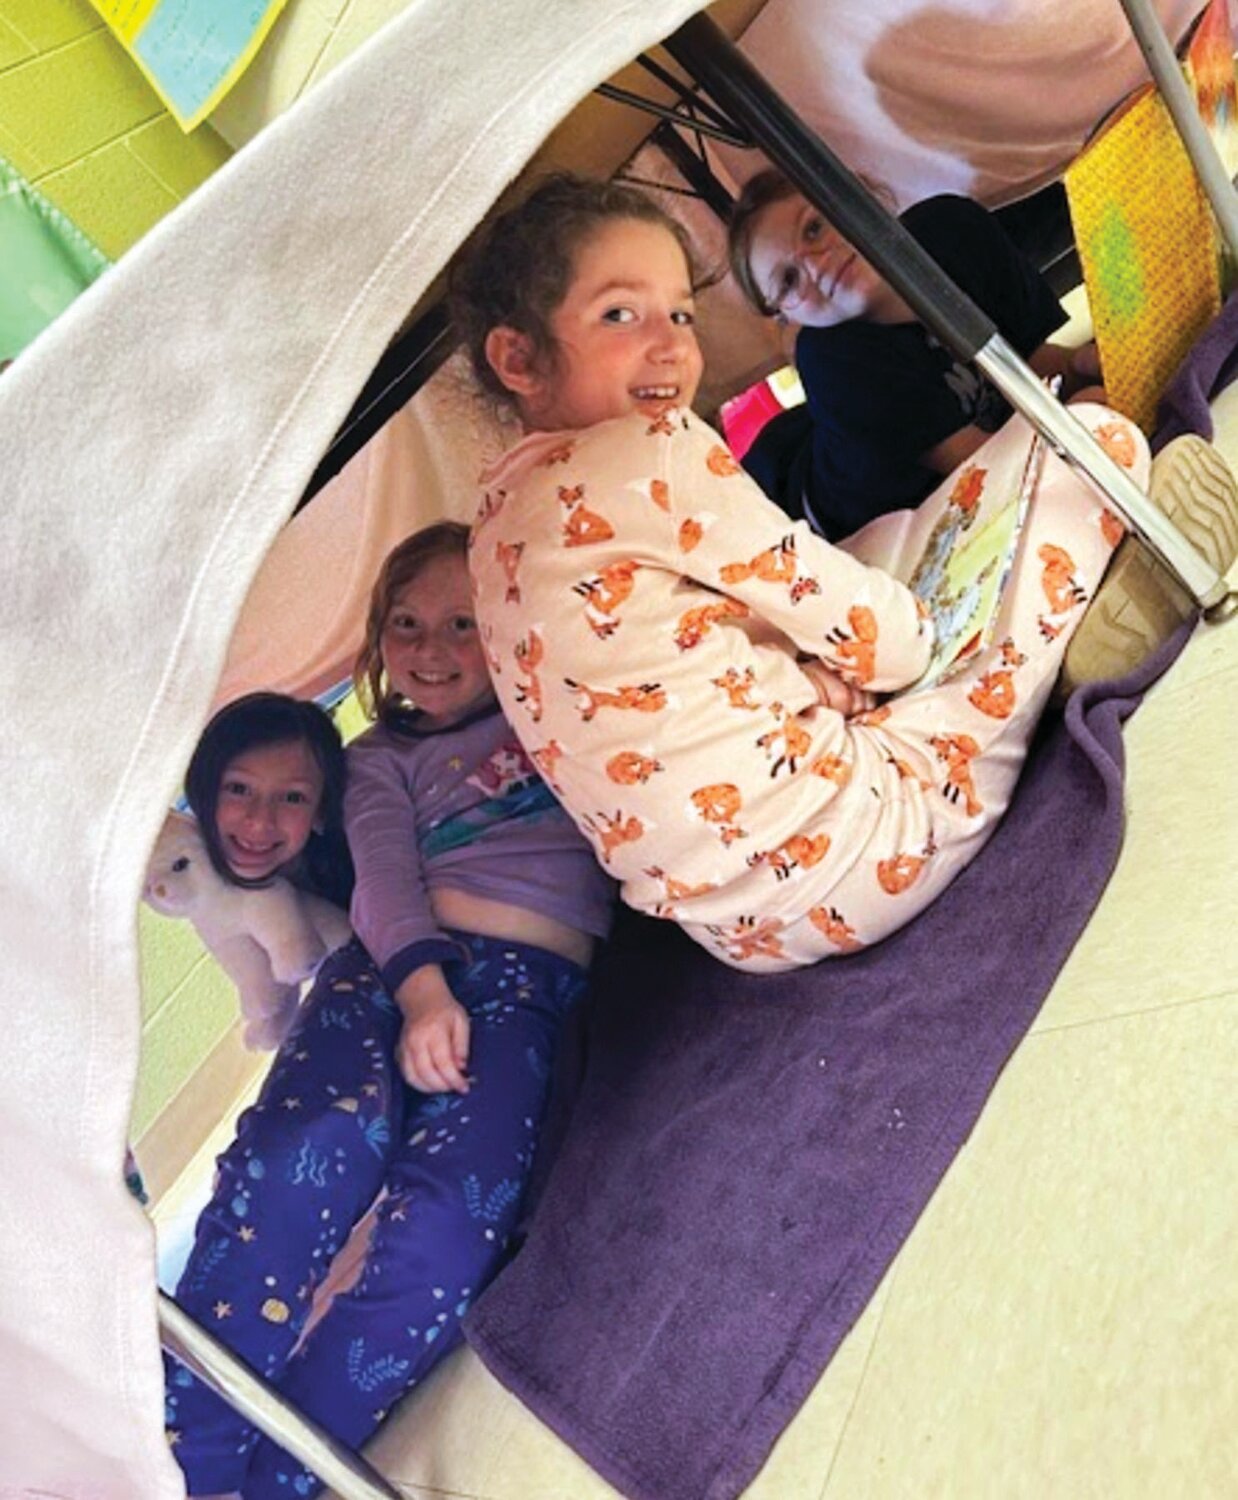 Second grade students in Tricia Fox’s class at Maureen M. Welch Elementary School read books during “Fort Time” on Pajama Day last week.